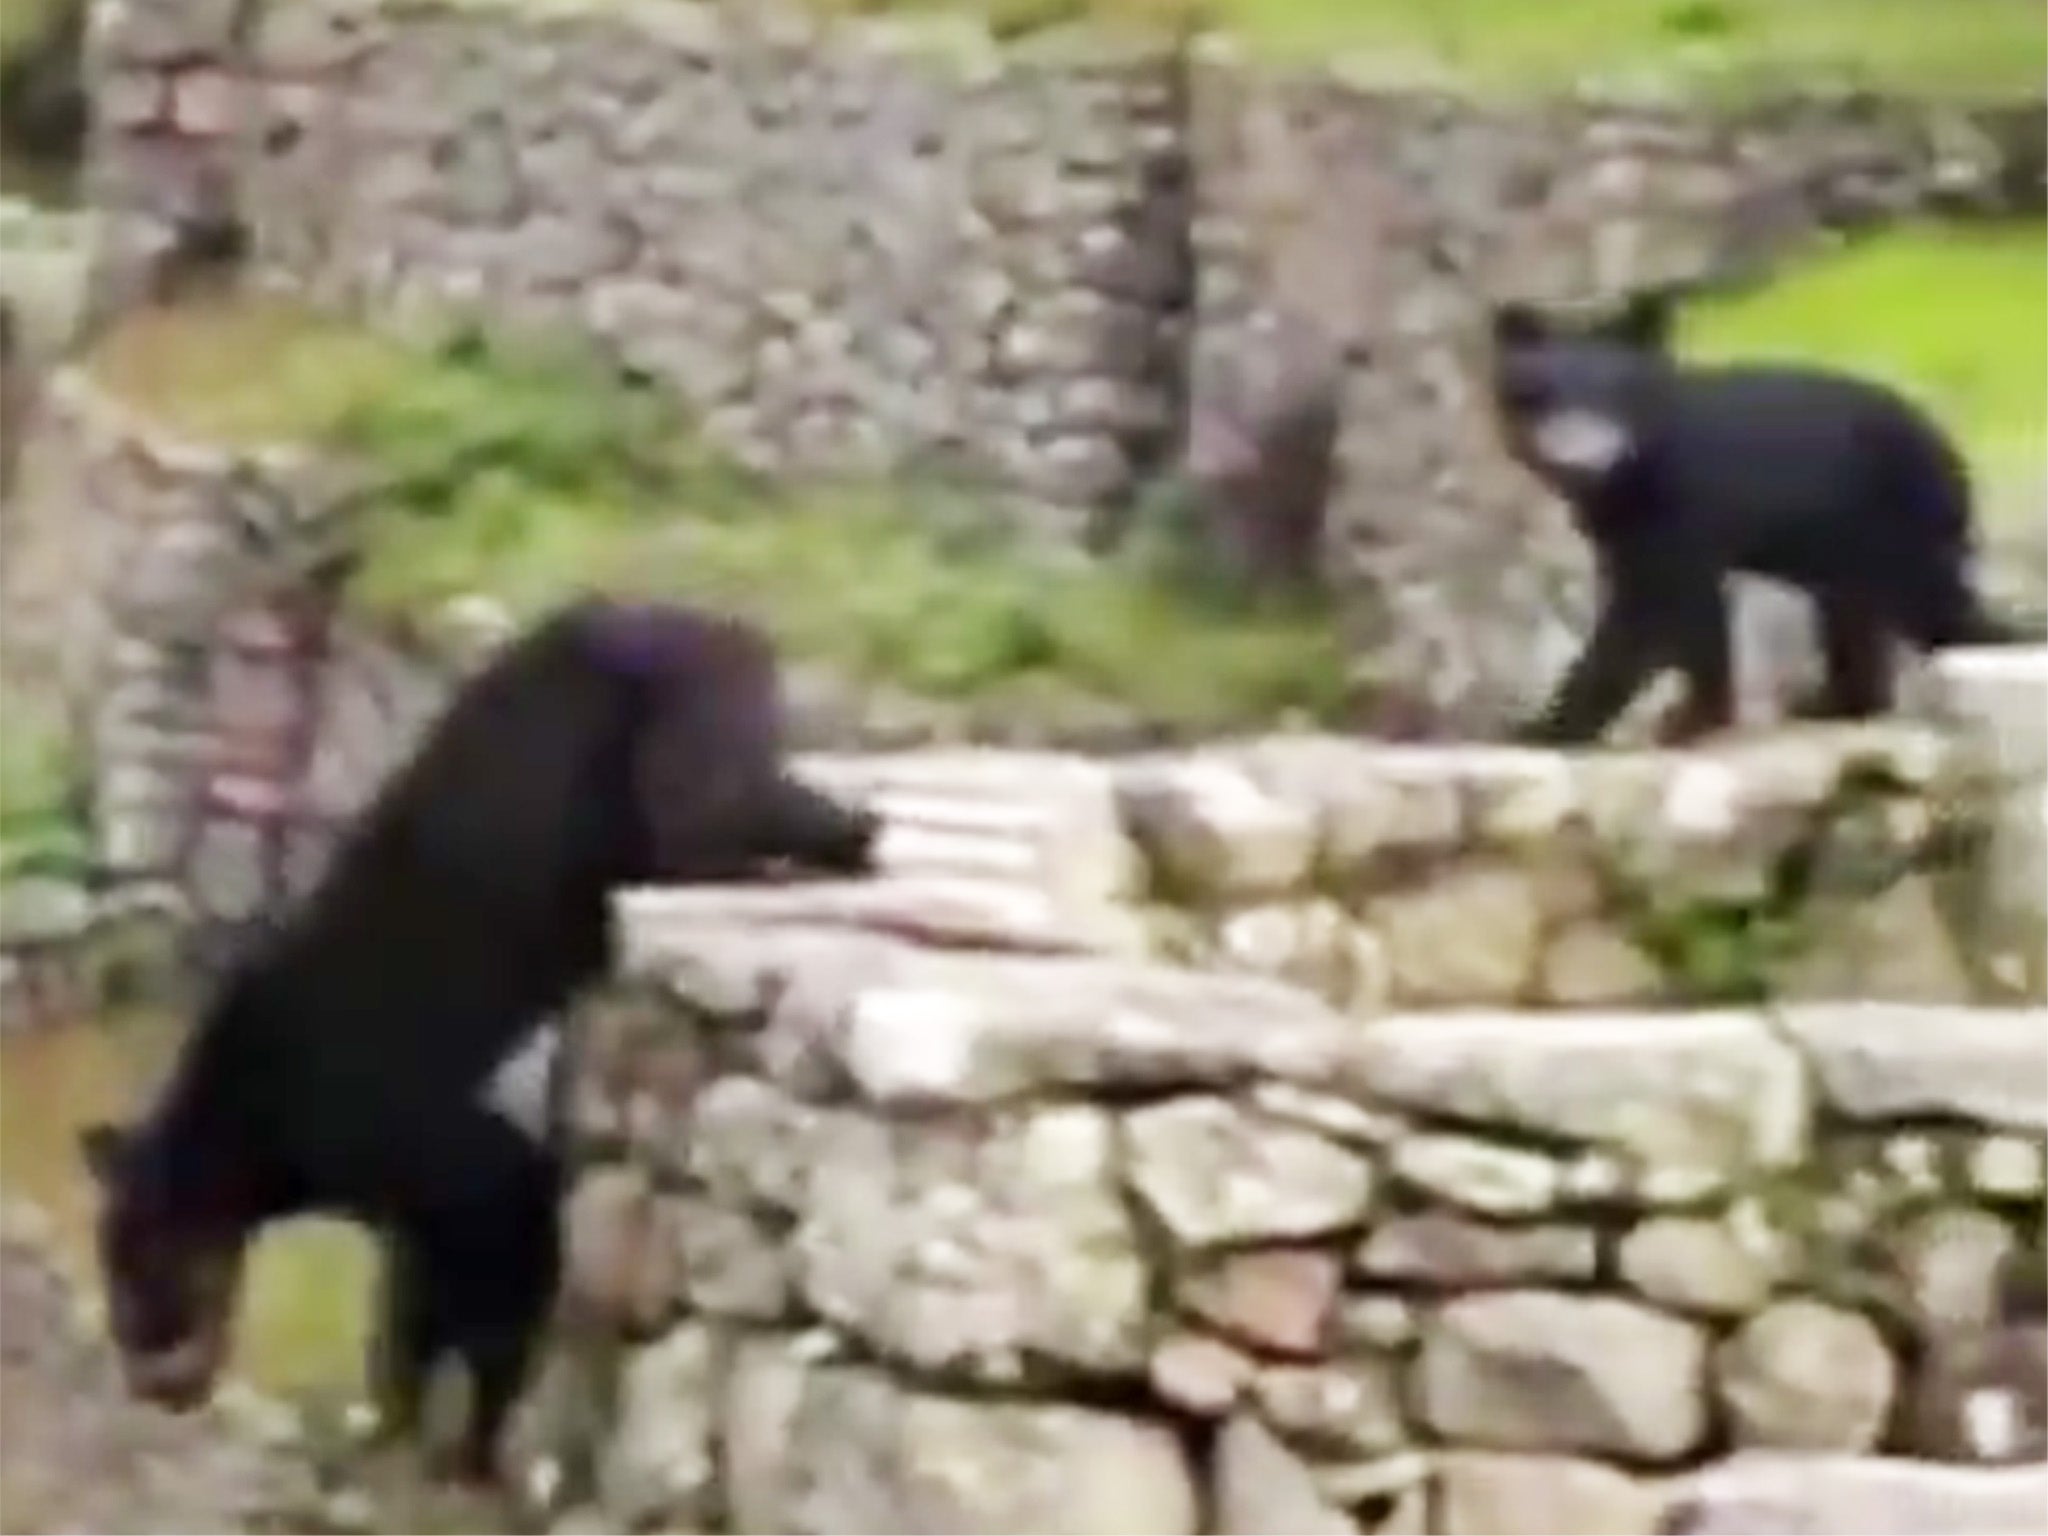 Rare Andean bears were filmed strolling around the slopes of Machu Picchu citadel in Peru